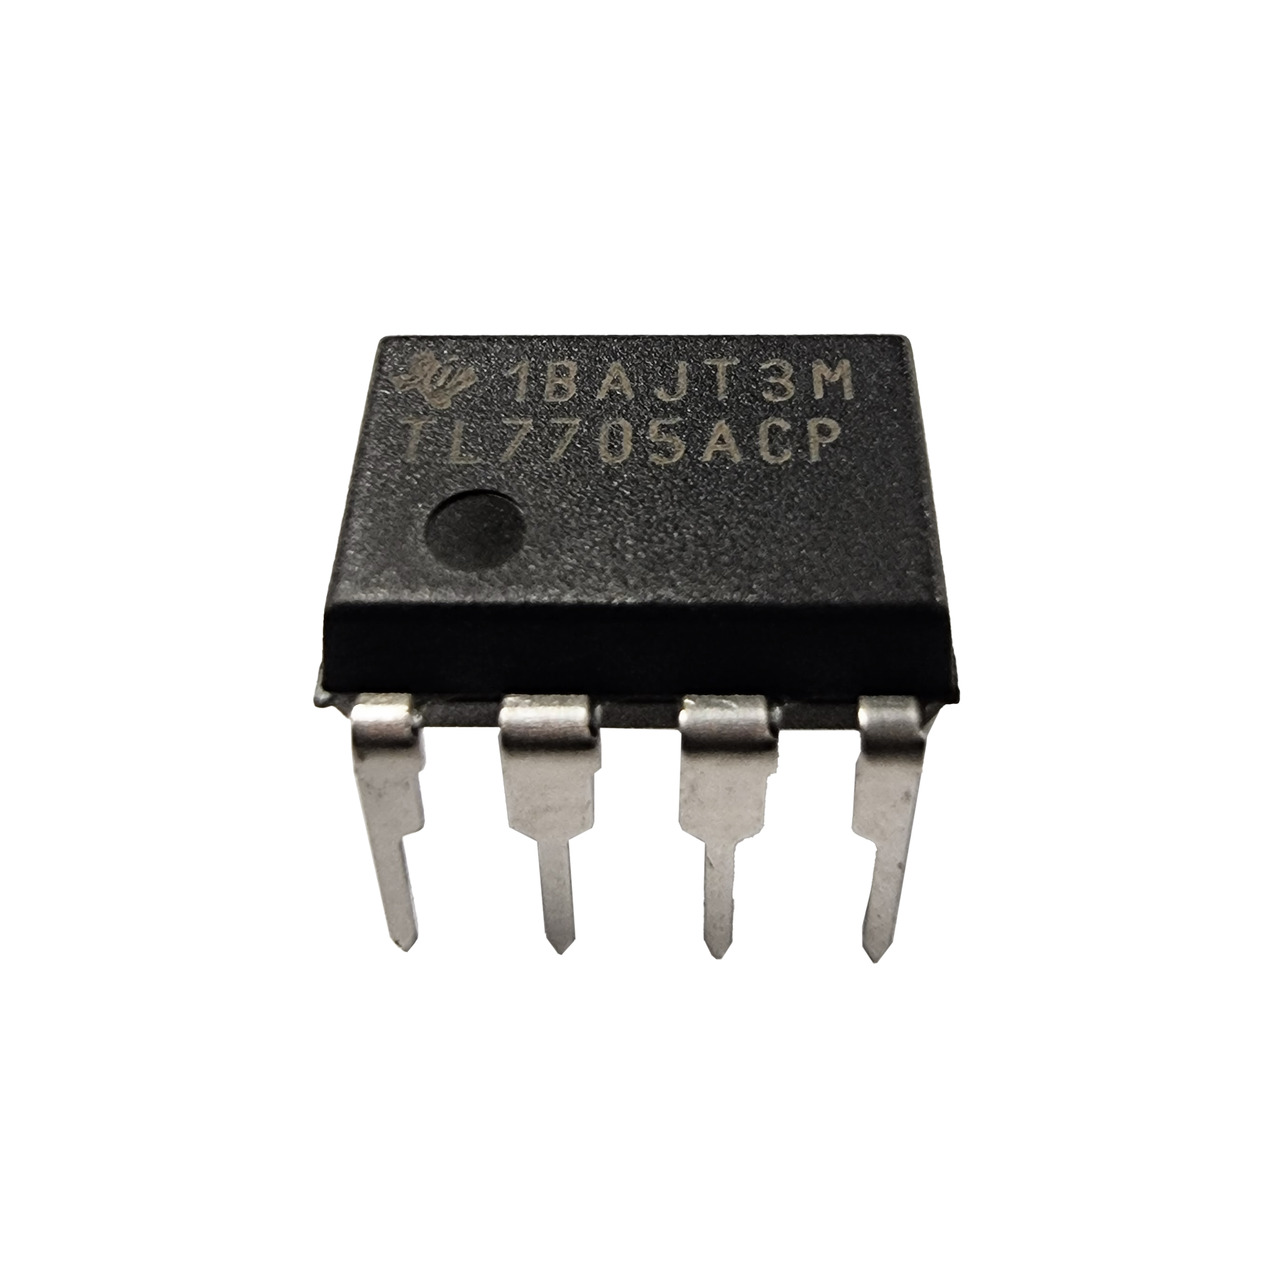 ON Semiconductor Unterspannungssensor MC33064P-5- 4-54-7 V- TO92